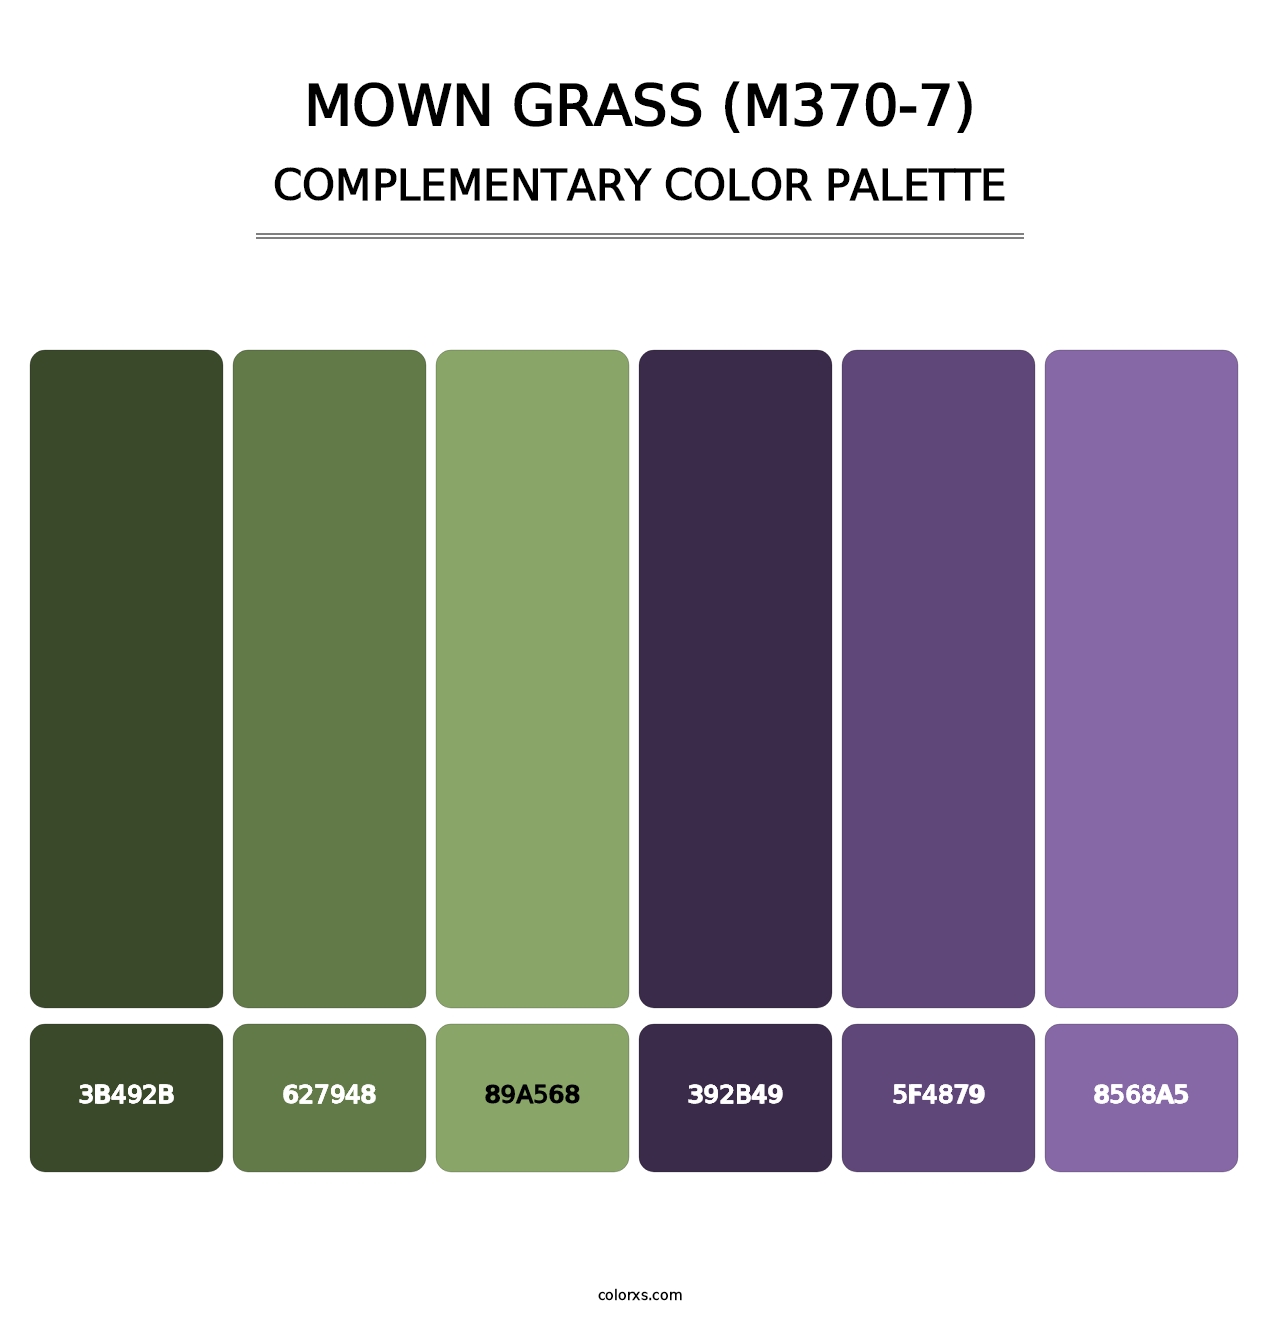 Mown Grass (M370-7) - Complementary Color Palette